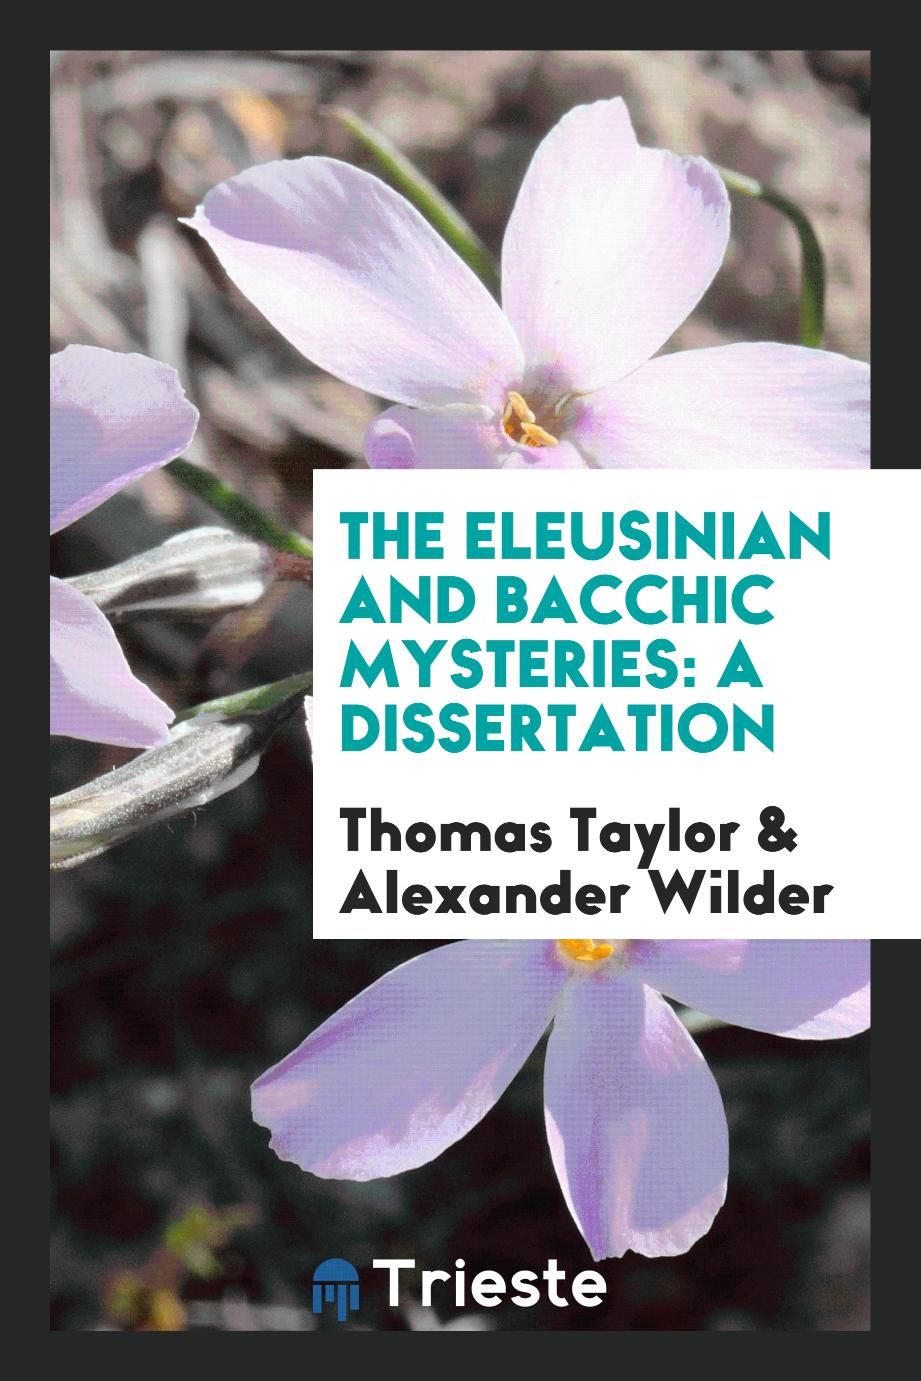 Thomas Taylor, Alexander Wilder - The Eleusinian and Bacchic Mysteries: A Dissertation